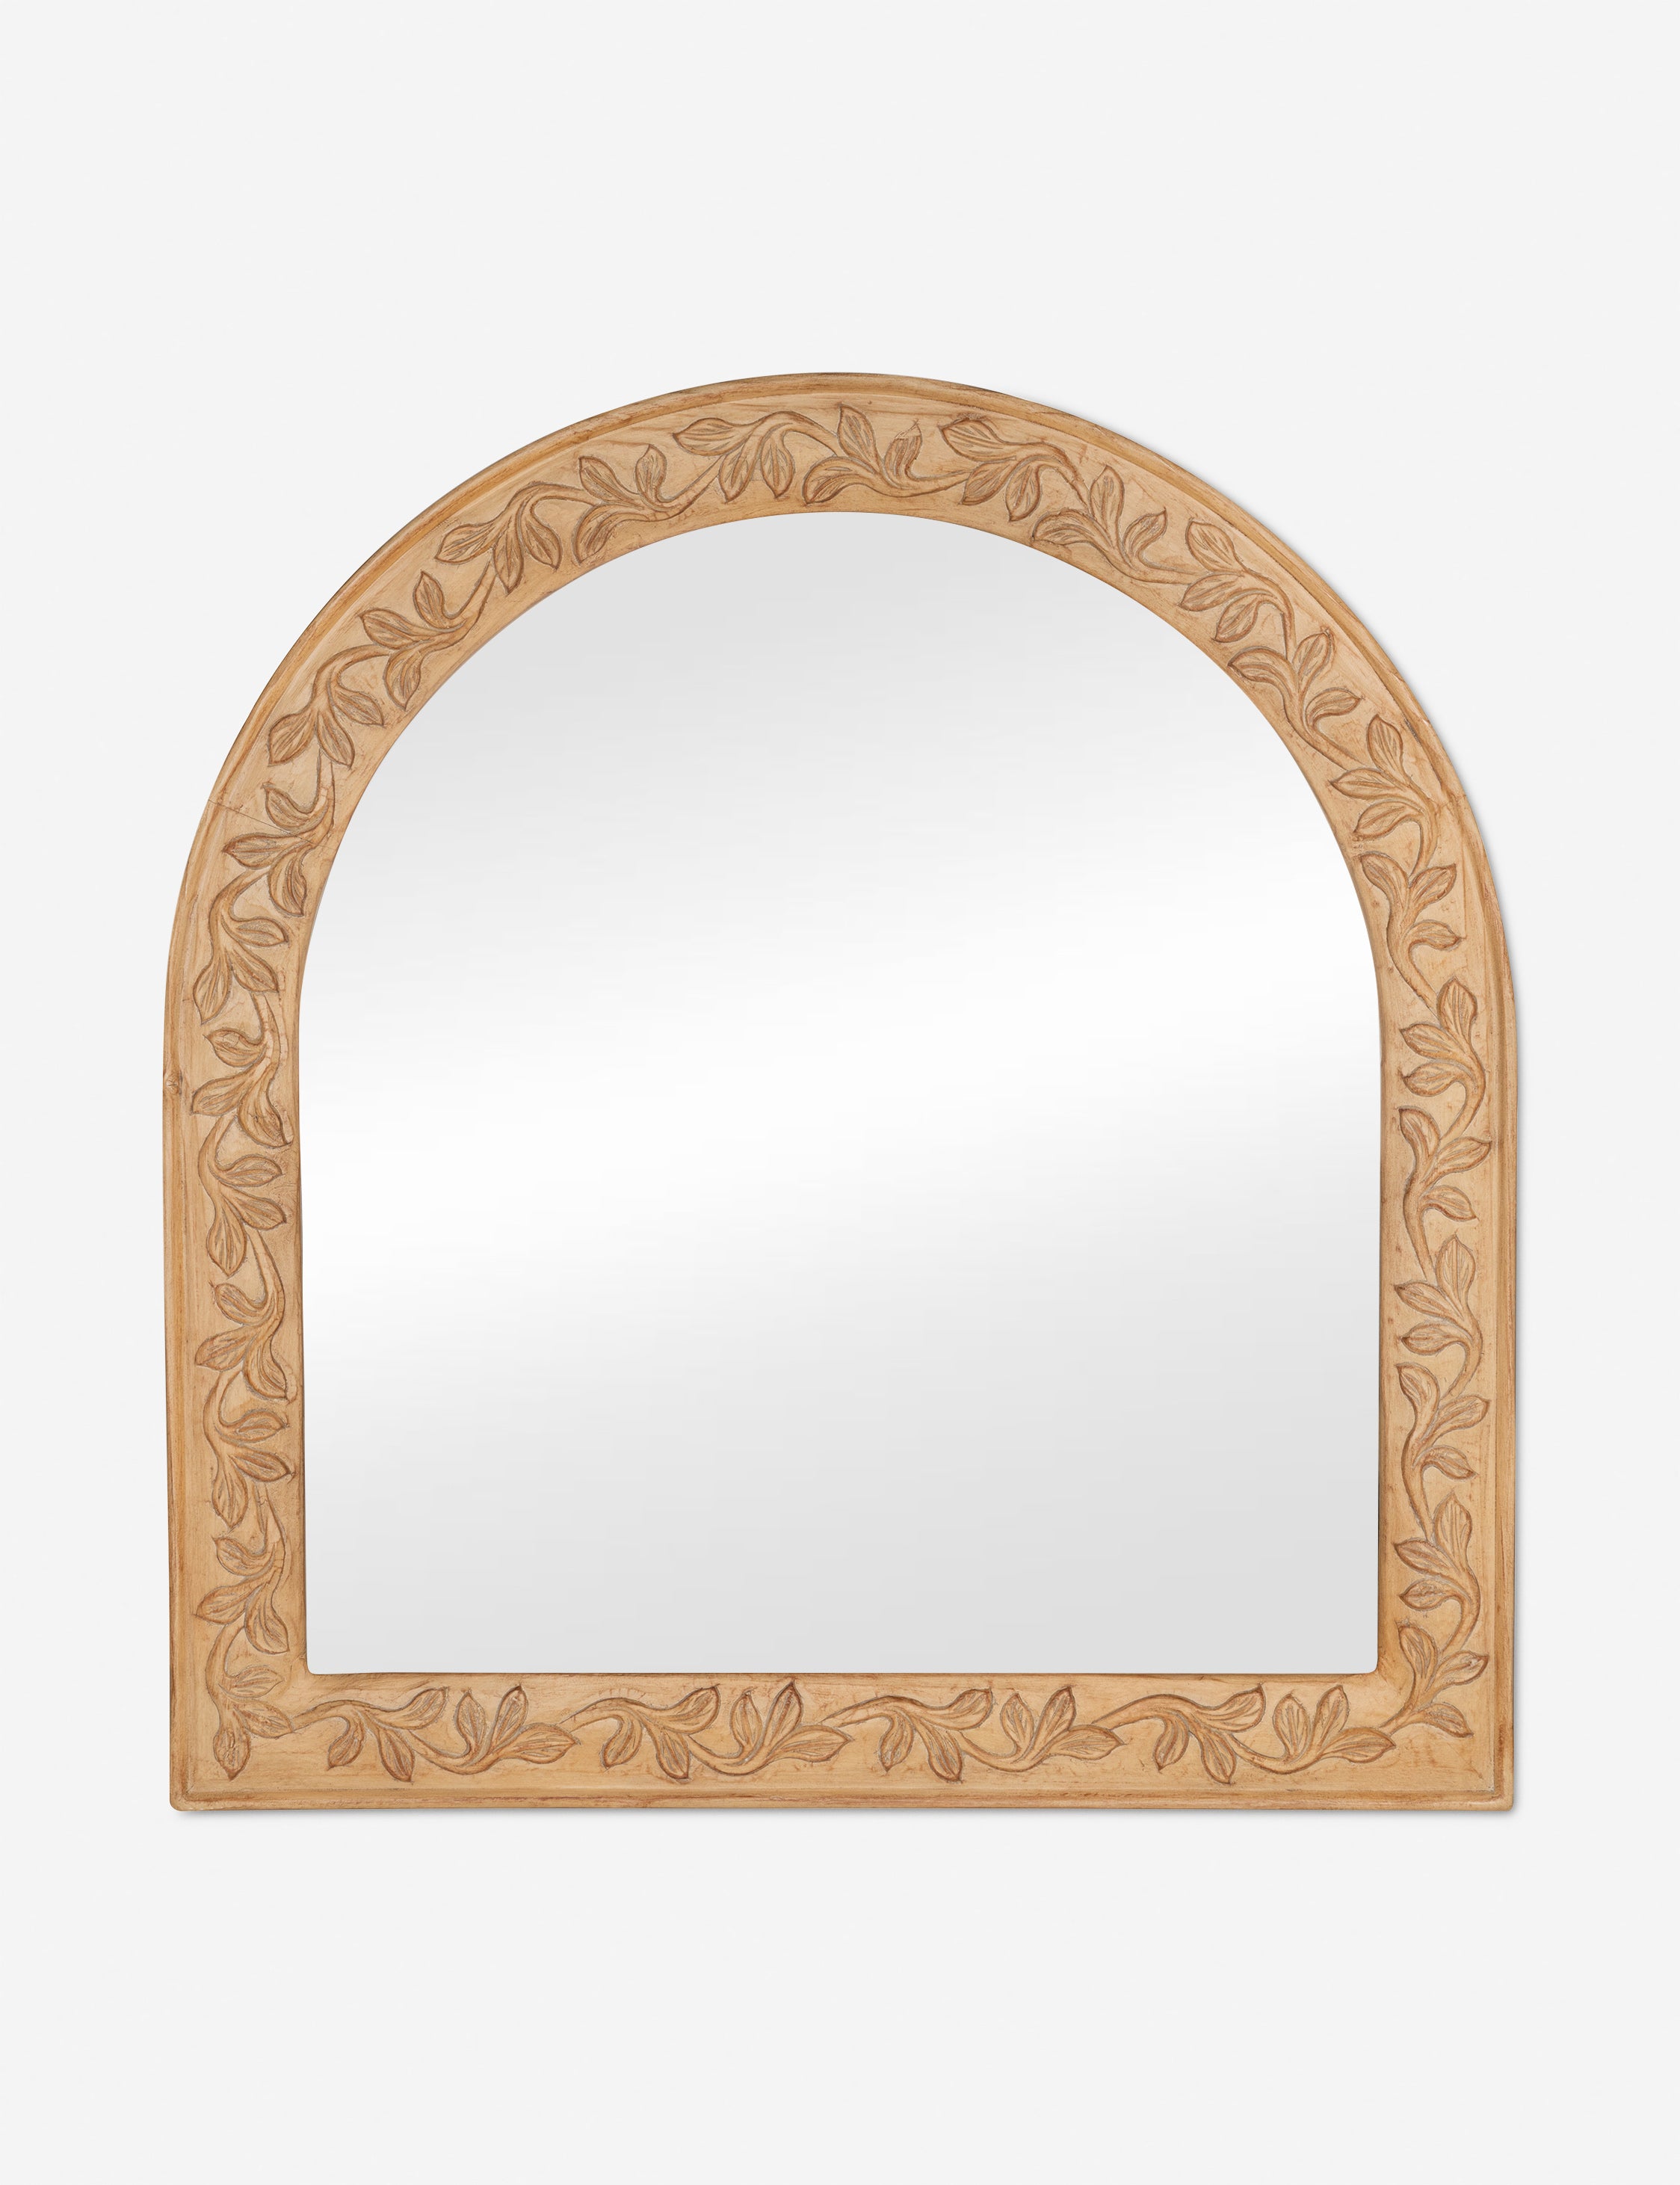 Image of Arched Anthea Mantel Mirror